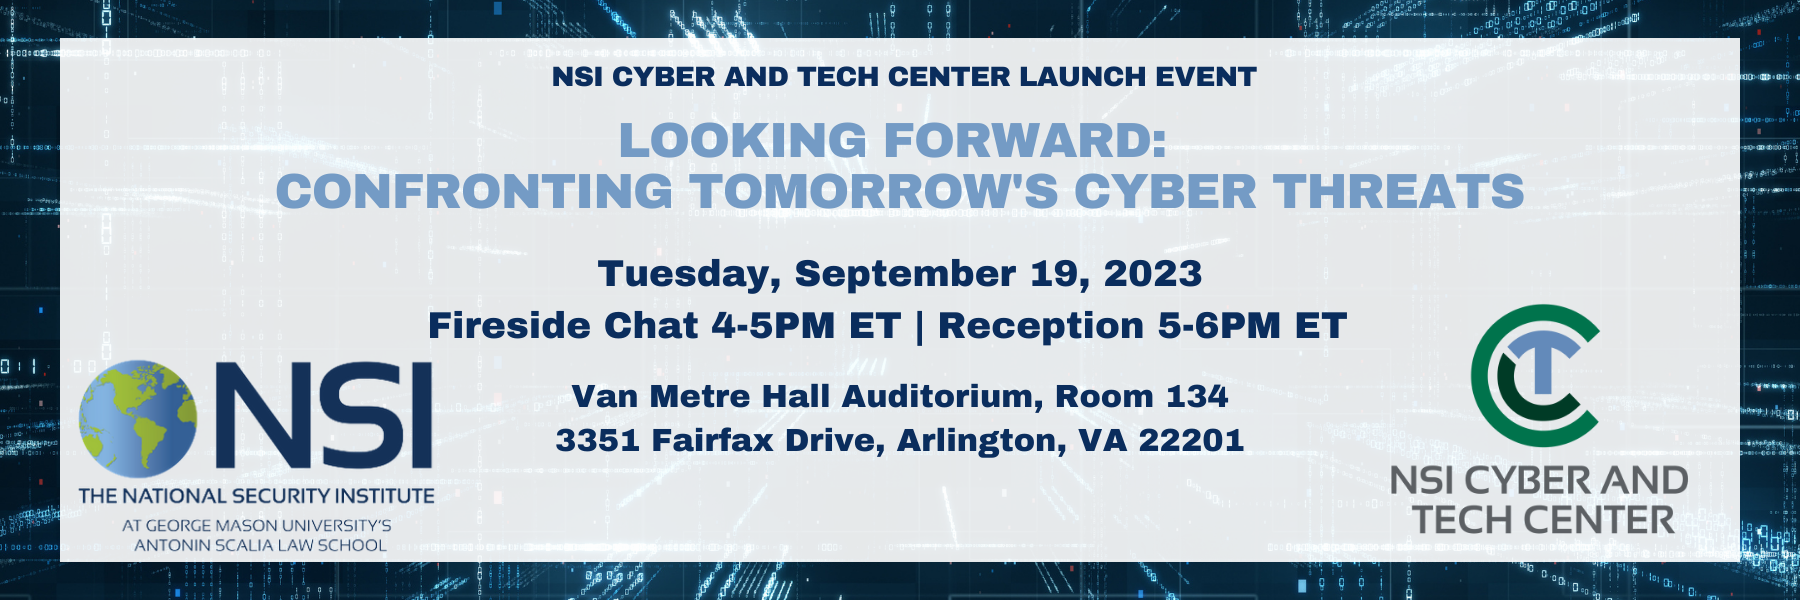 Official Launch: NSI Cyber and Tech Center